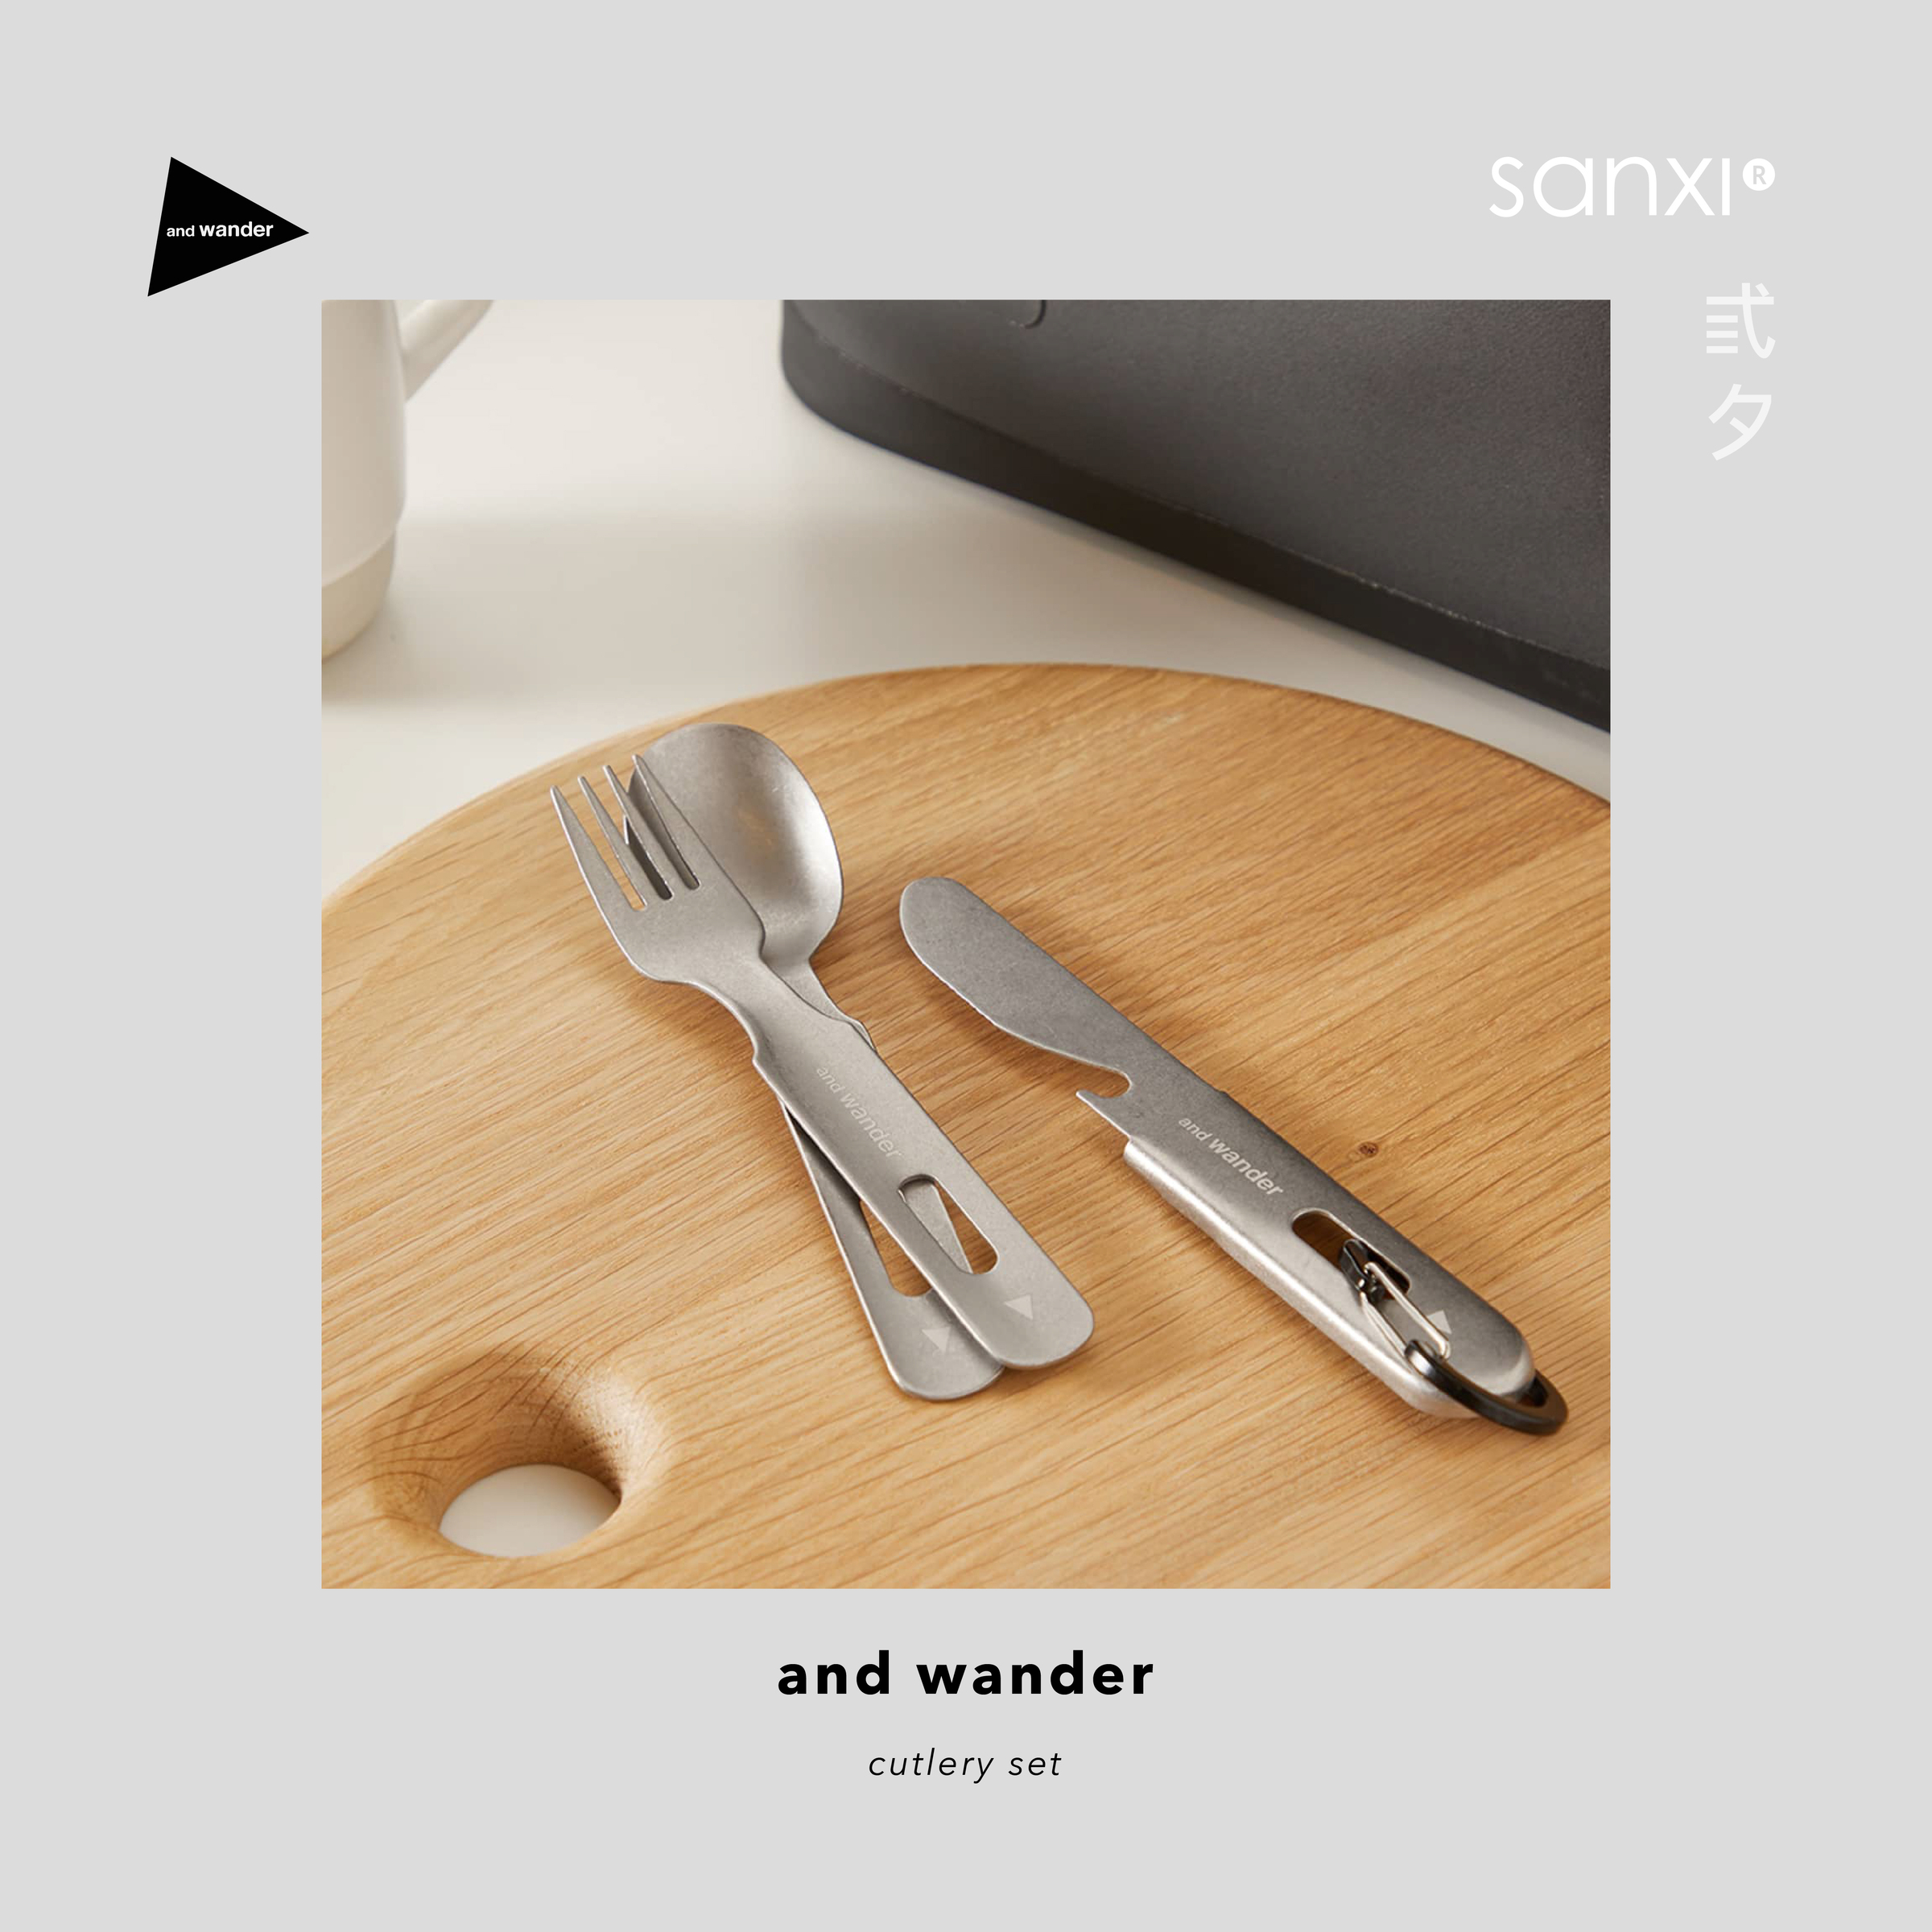 SANXI_商品圖｜and_and wander cutlery set